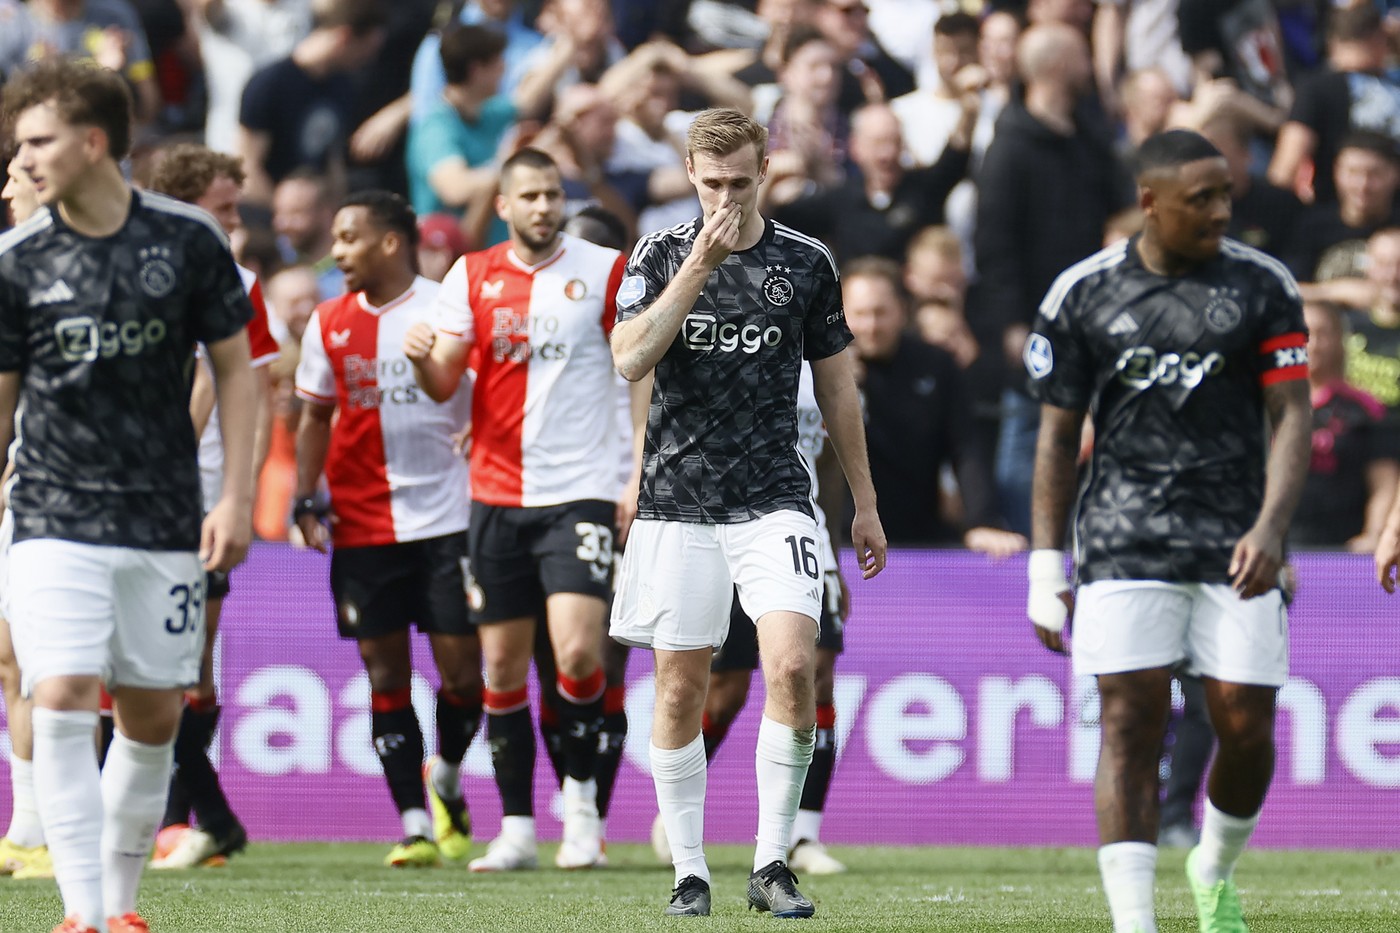 4/7/2024 - ROTTERDAM - (l-r) Benjamin Tahirovic of Ajax, Sivert Mannsverk of Ajax, Steven Bergwijn of Ajax during the Dutch Eredivisie match between Feyenoord and Ajax at Feyenoord Stadion de Kuip on April 7, 2024 in Rotterdam, Netherlands. ANP PIETER STAM DE JONGE /ANP/Sipa USA,Image: 863113215, License: Rights-managed, Restrictions: *** World Rights Except Belgium, France, Germany, The Netherlands, and the UK ***  BELOUT DEUOUT FRAOUT GBROUT NLDOUT, Model Release: no, Credit line: ANP / ddp USA / Profimedia